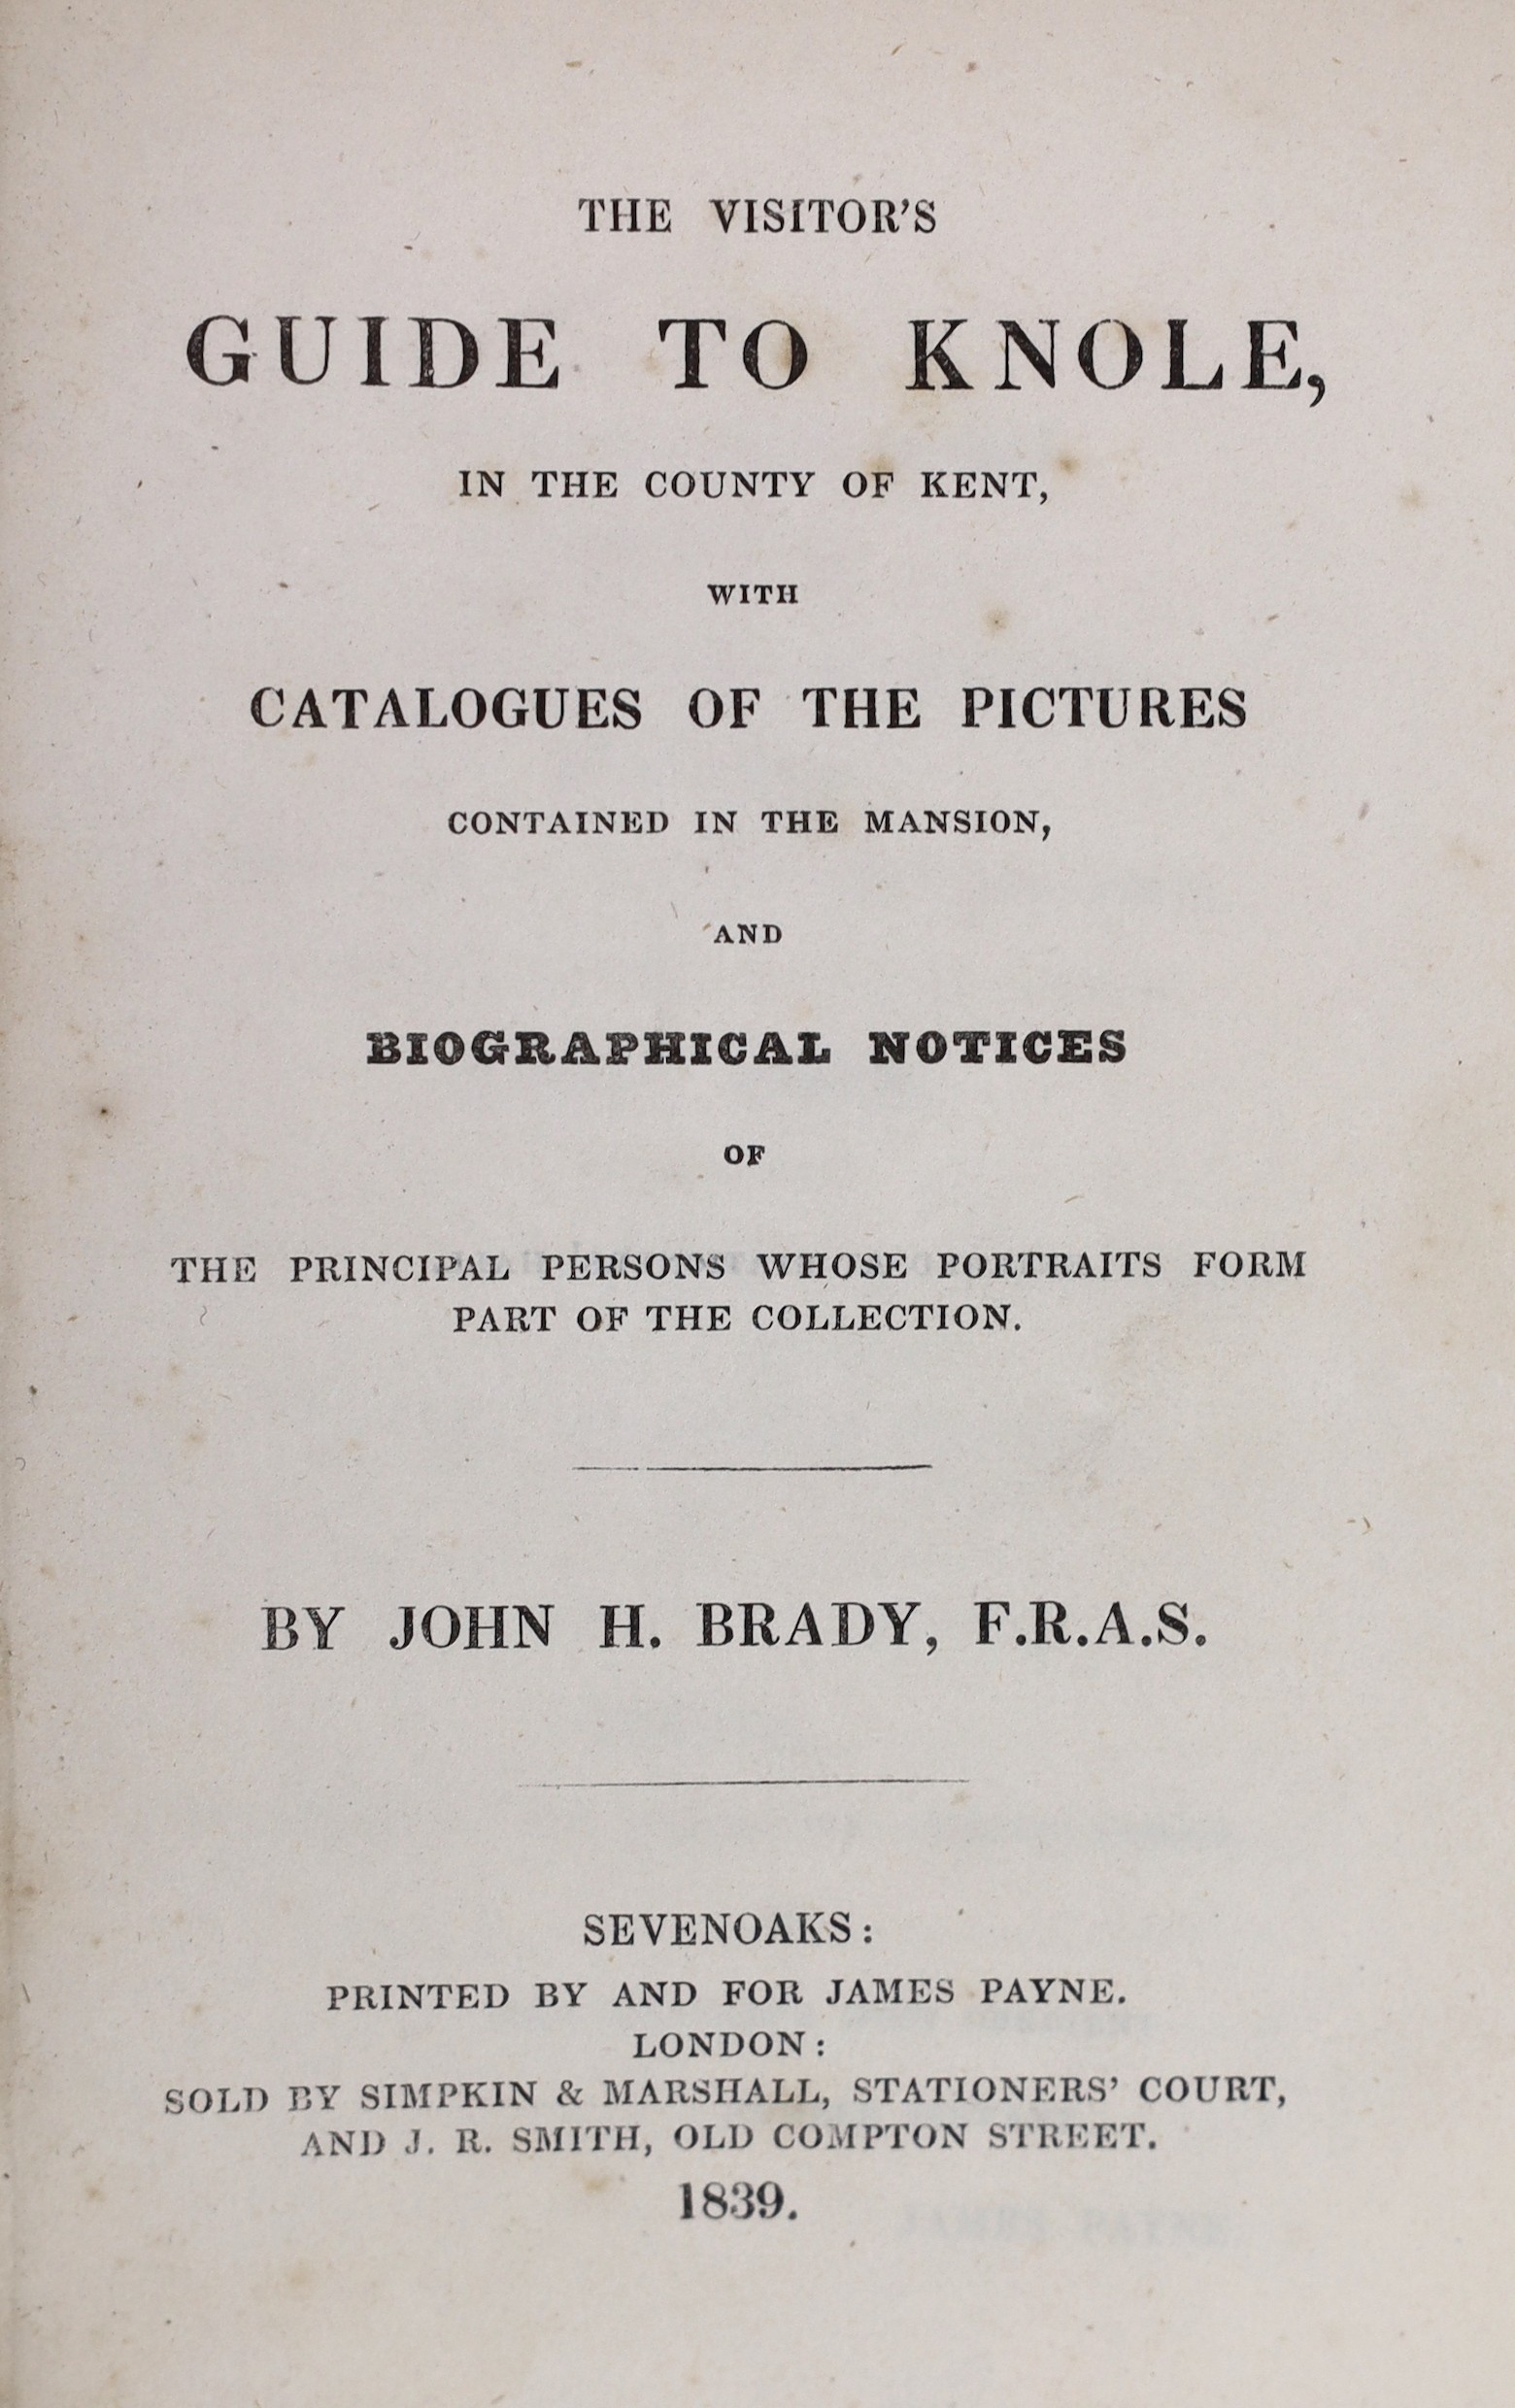 KENT: Brady, John H. - The Visitor's Guide to Knole ... with Catalogues of the Pictures ... 6 plates, folded pedigree and text engravings, half title, errata slip; original blind-decorated and gilt-lettered cloth, 12mo.